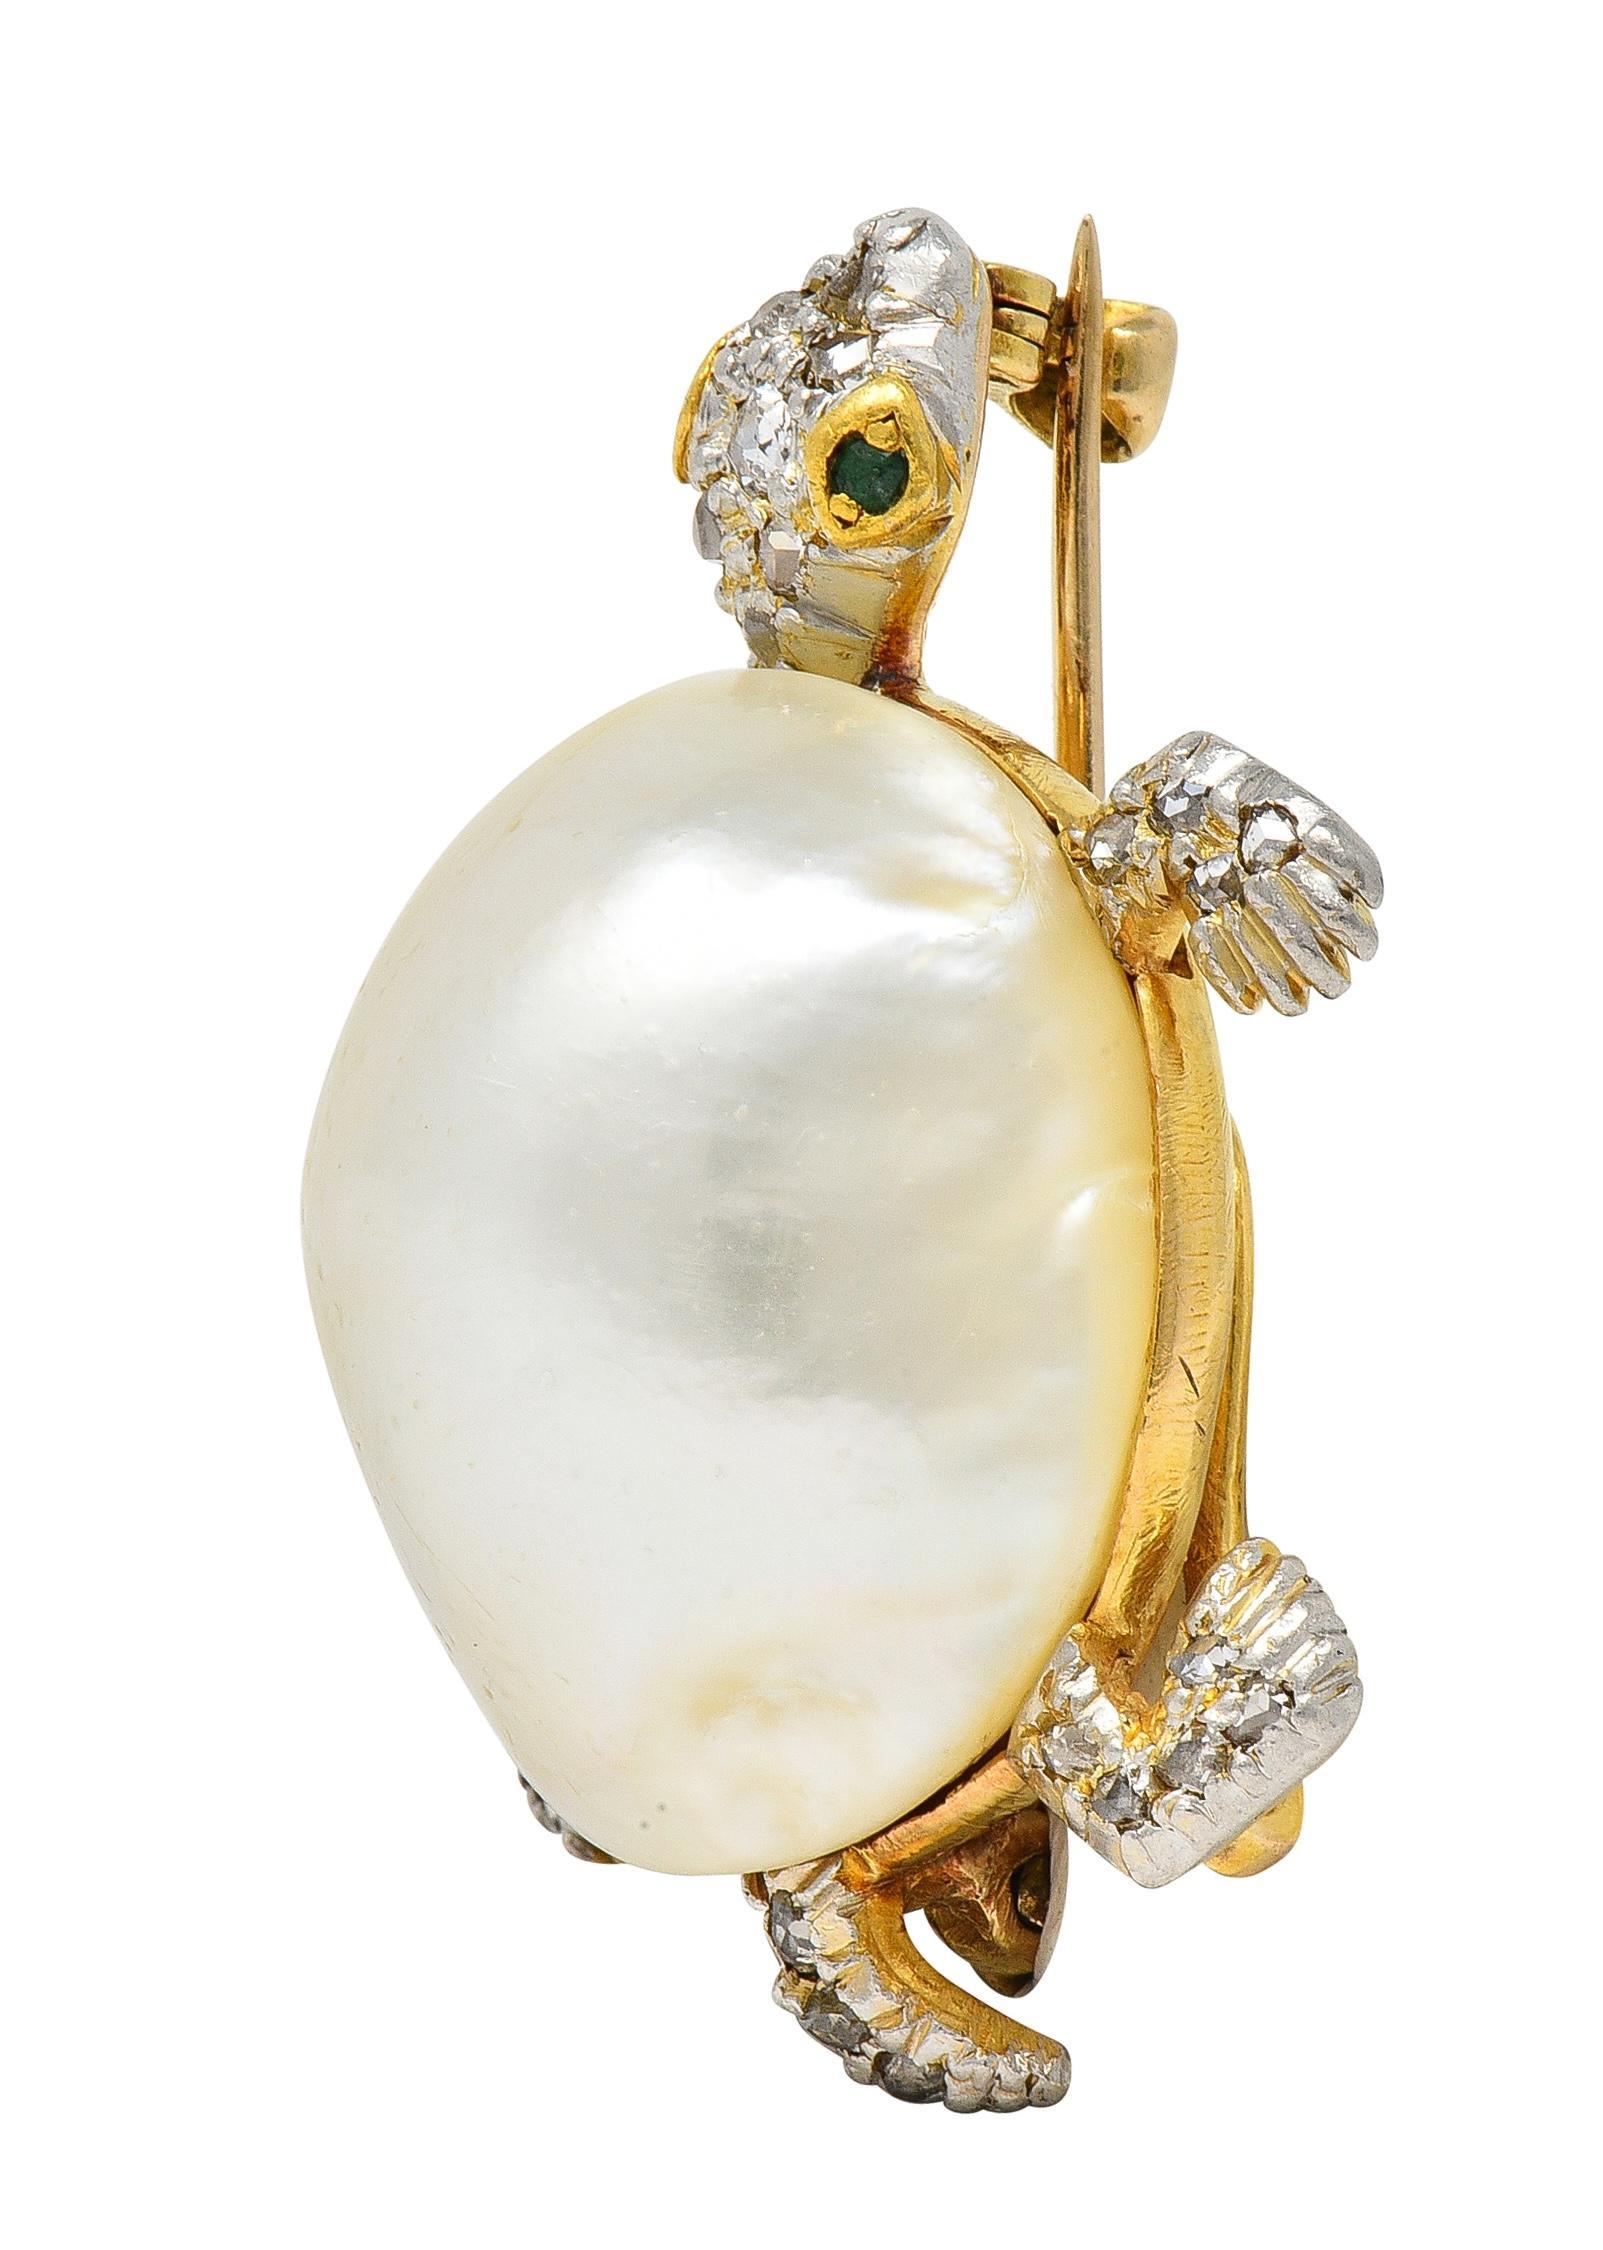 Designed as a stylized gold turtle sporting a blister pearl shell measuring 19.0 x22.0 mm 
Cream in body color with strong iridescence - with platinum-topped legs, head, and tail
Flush set throughout with rose cut diamonds weighing approximately